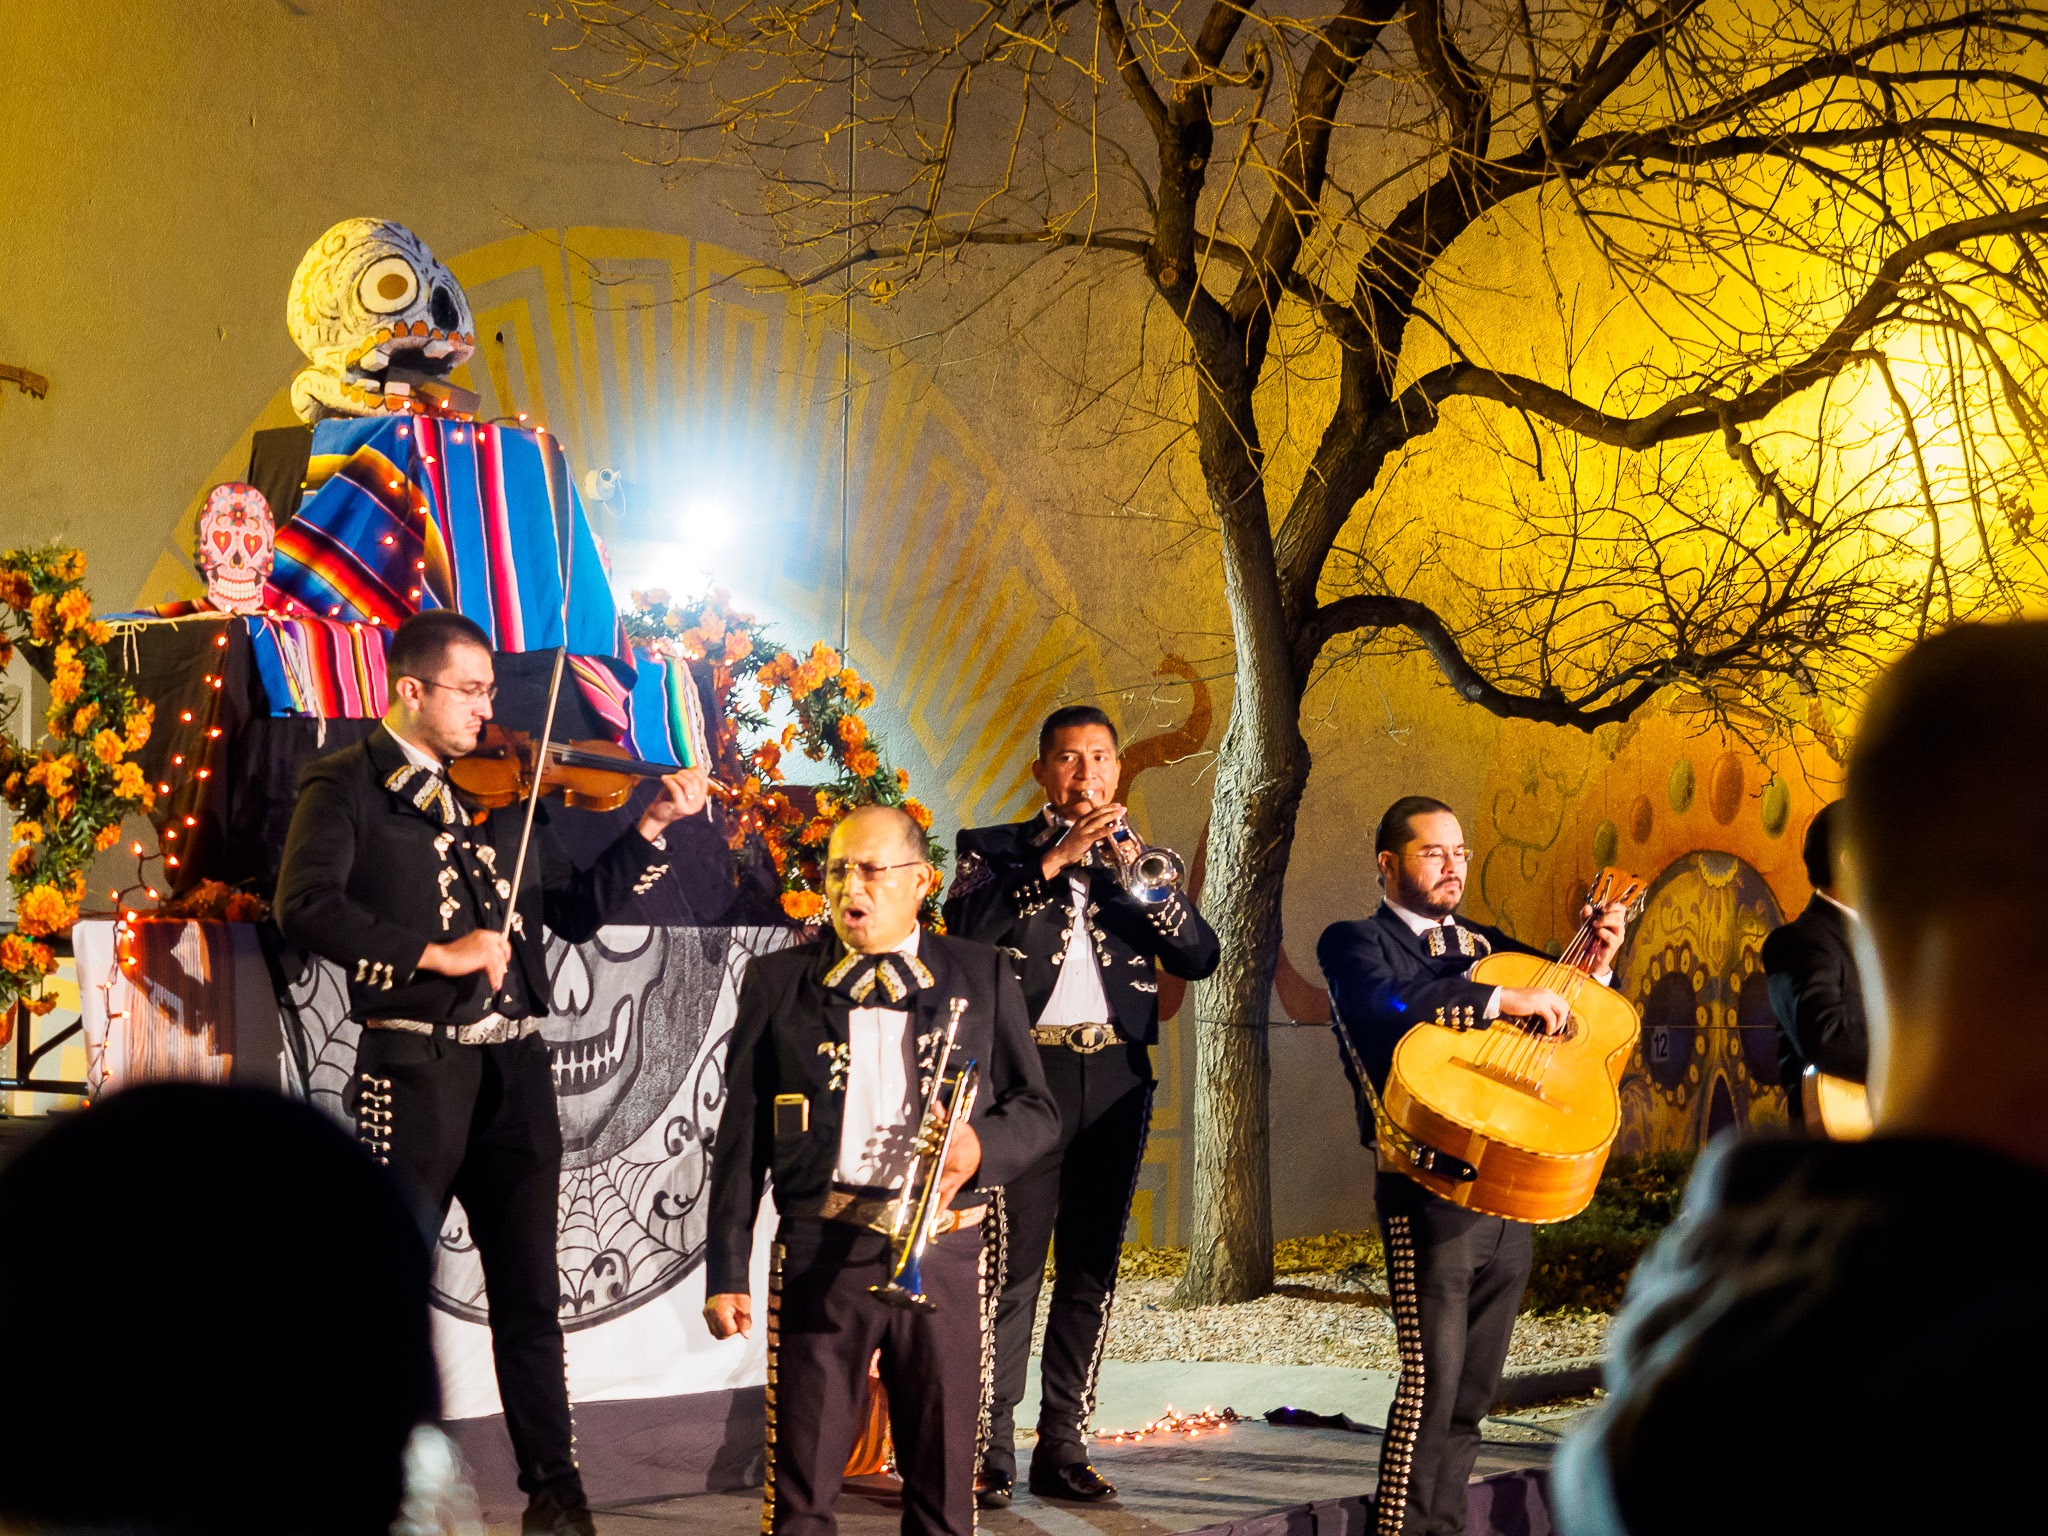 A band plays for the Day of the Dead